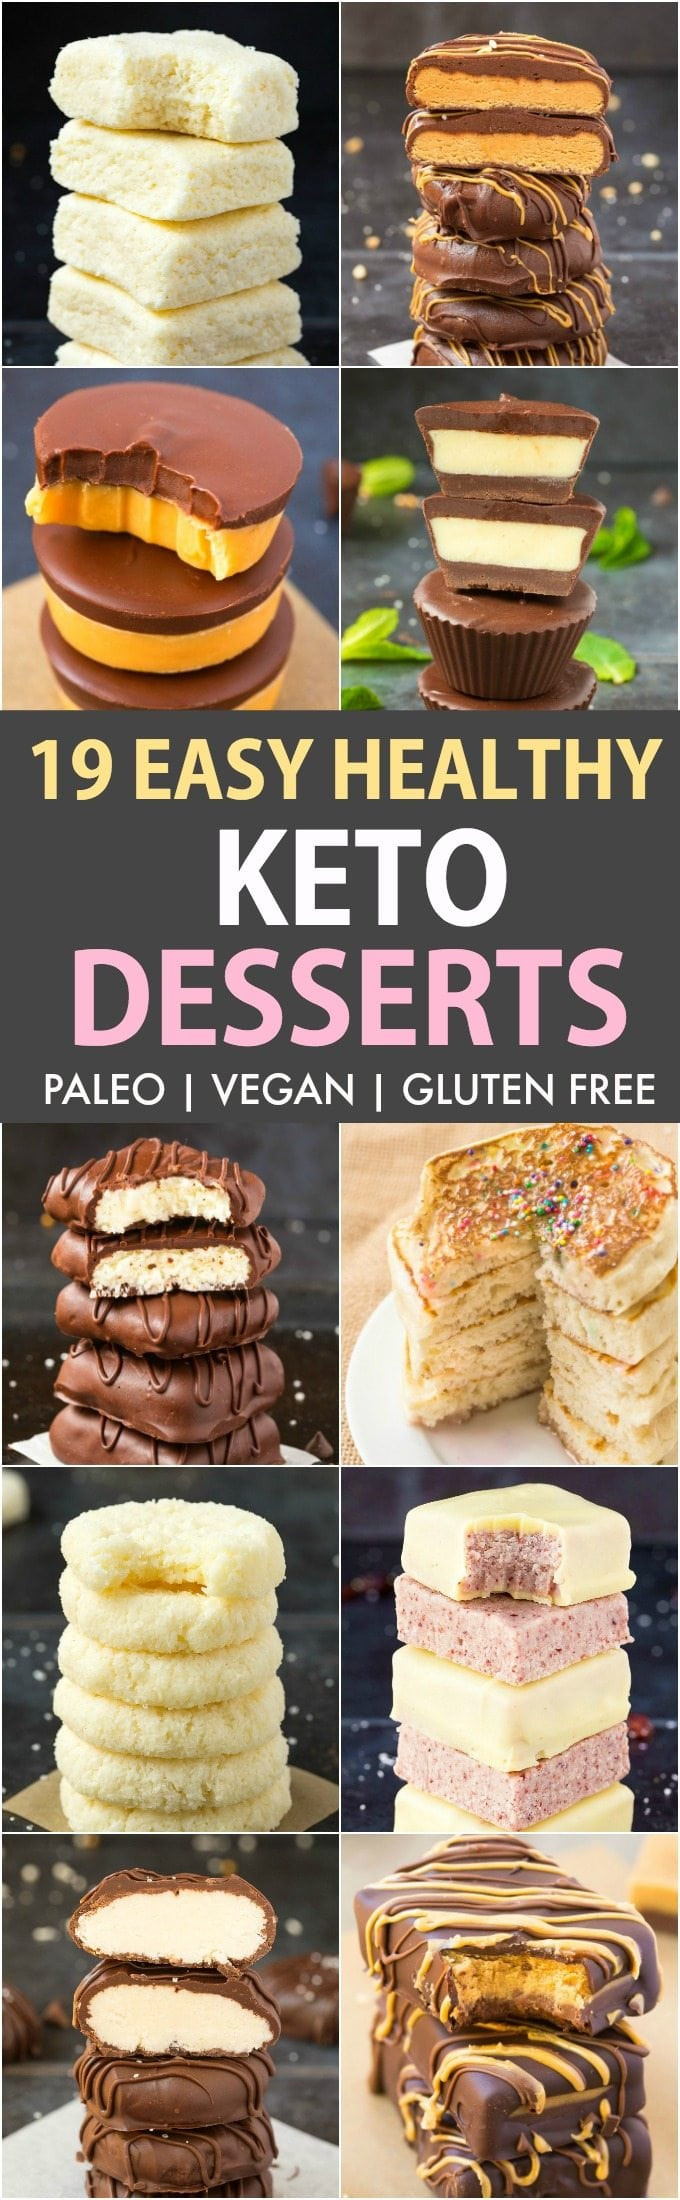 Keto Diet Snacks Sweet
 19 Easy Keto Desserts Recipes which are actually healthy